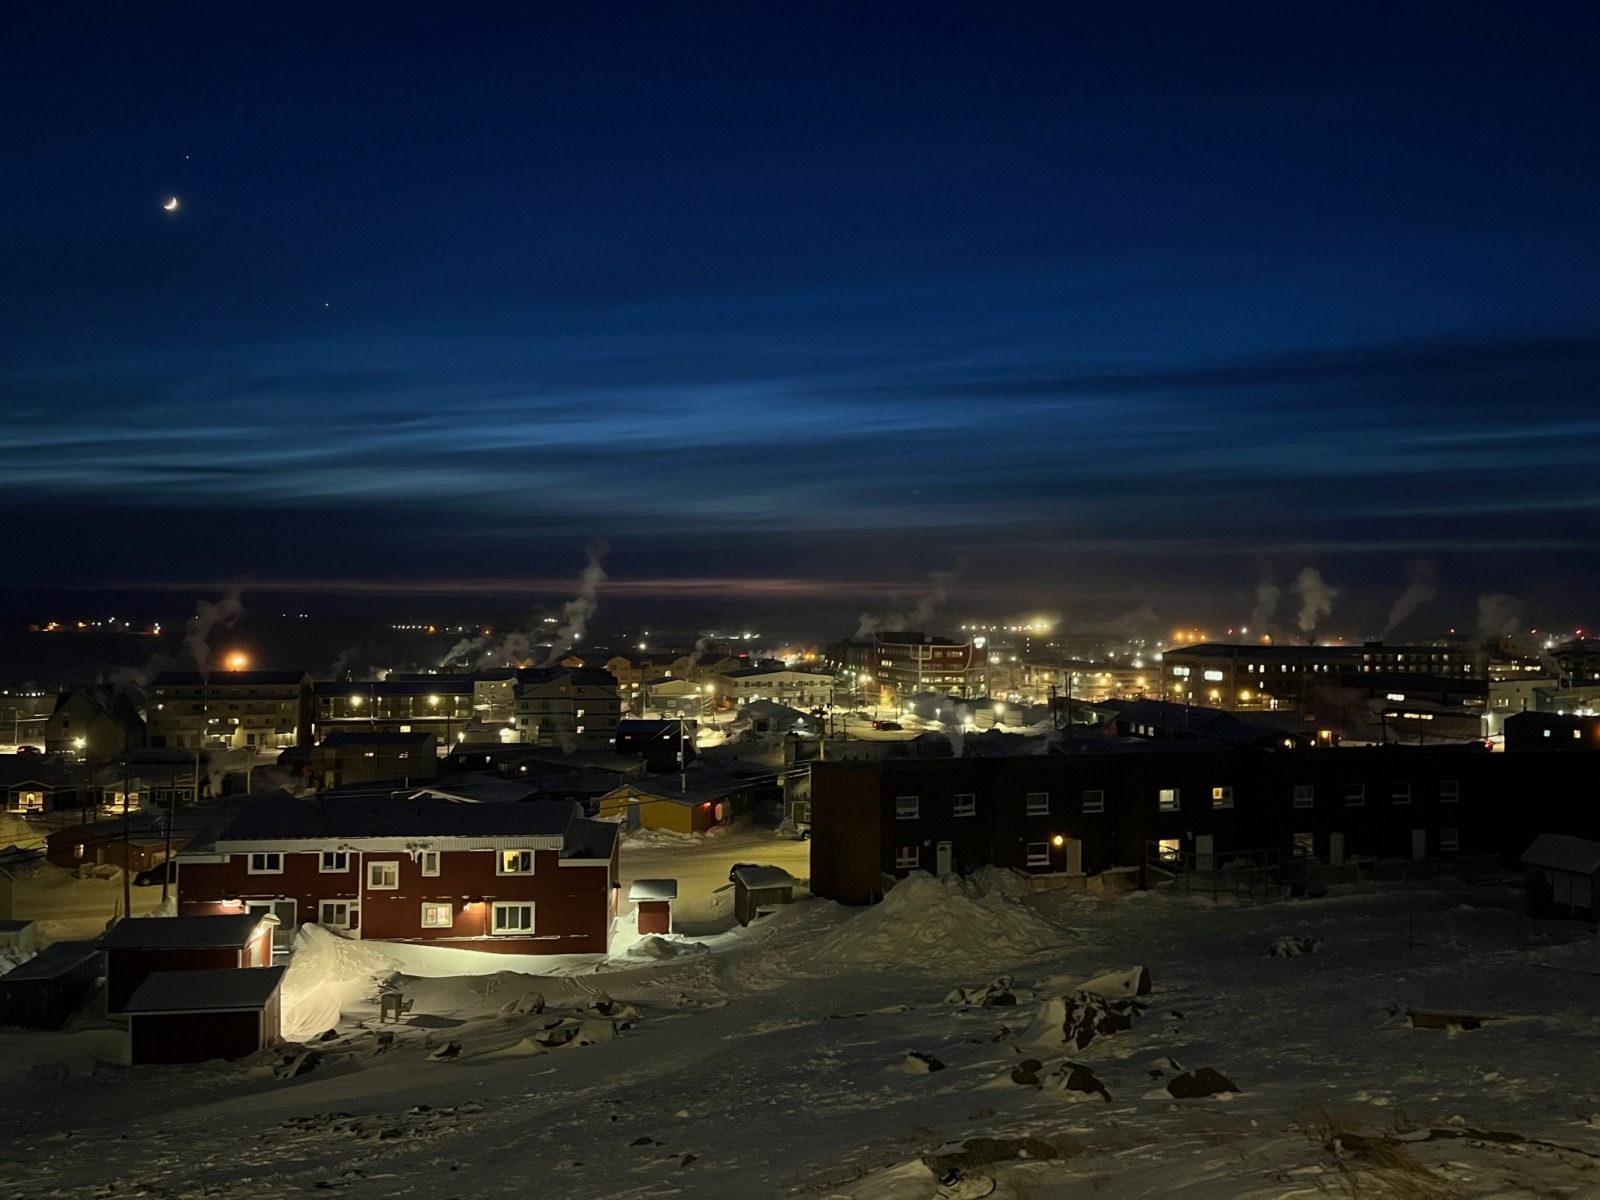 A Winter’s night over Iqaluit, seen from Astro Hill.